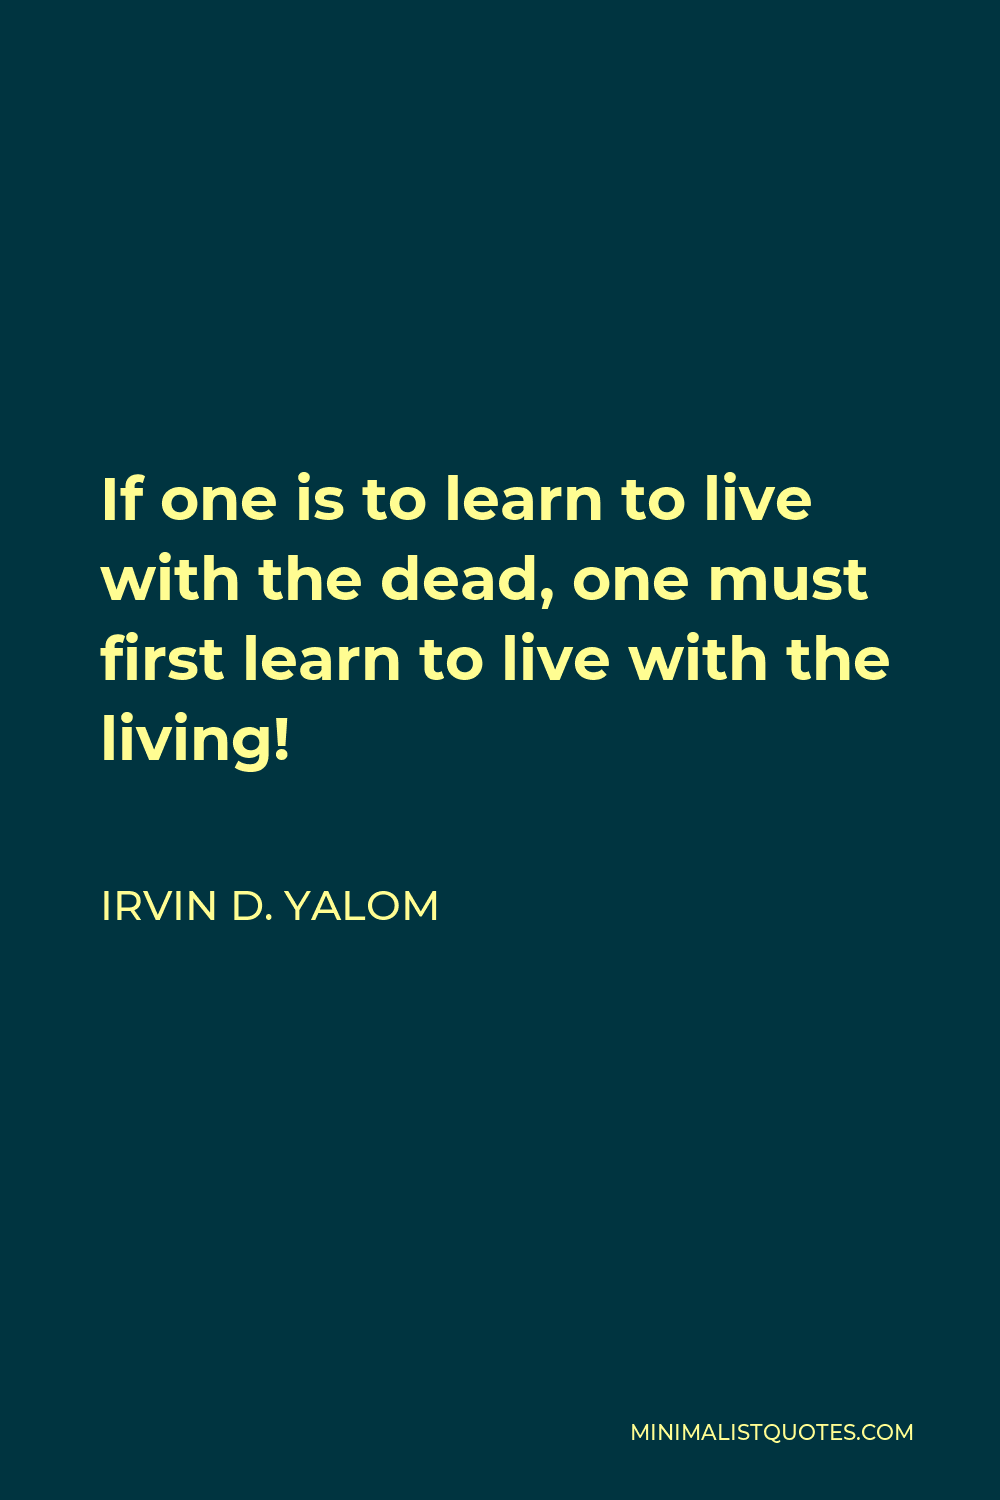 Irvin D. Yalom Quote - If one is to learn to live with the dead, one must first learn to live with the living!